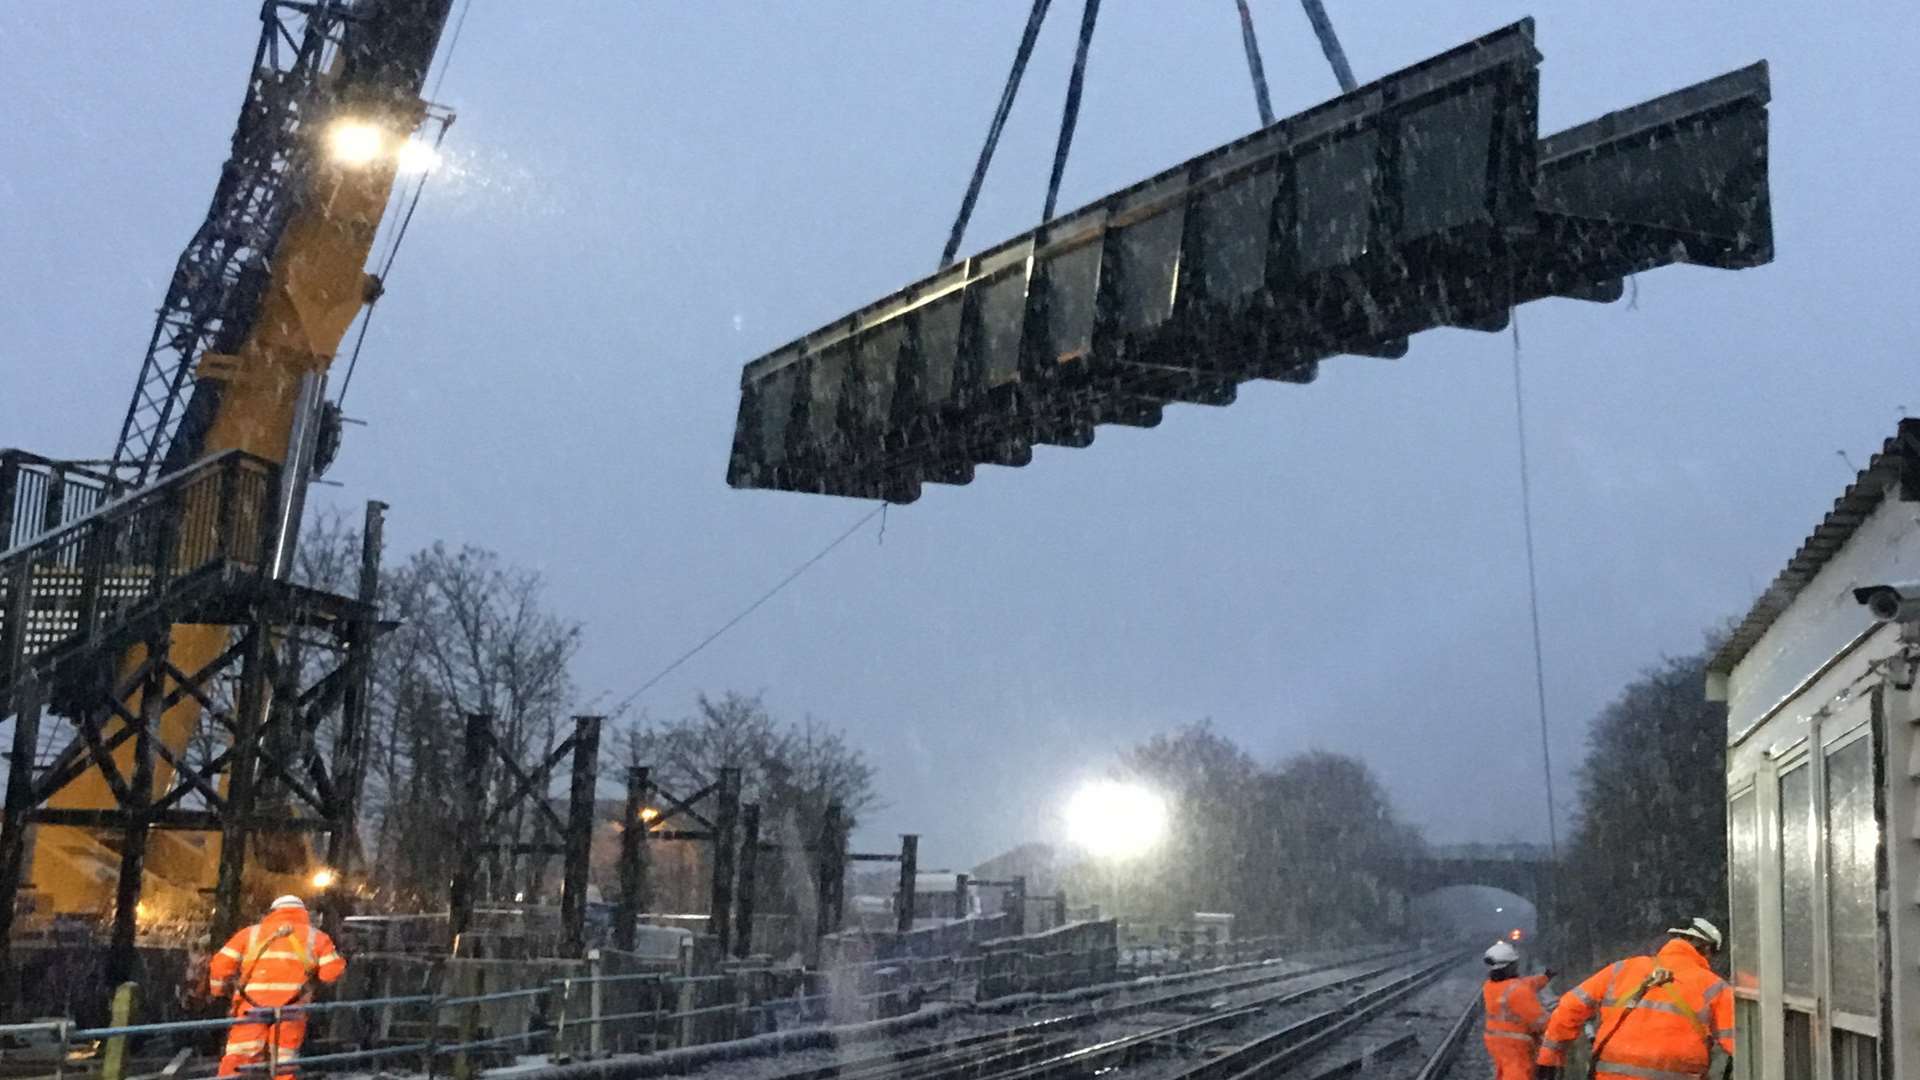 Stone Crossing railway station's new footbridge is lowered into place during an early morning snowstorm